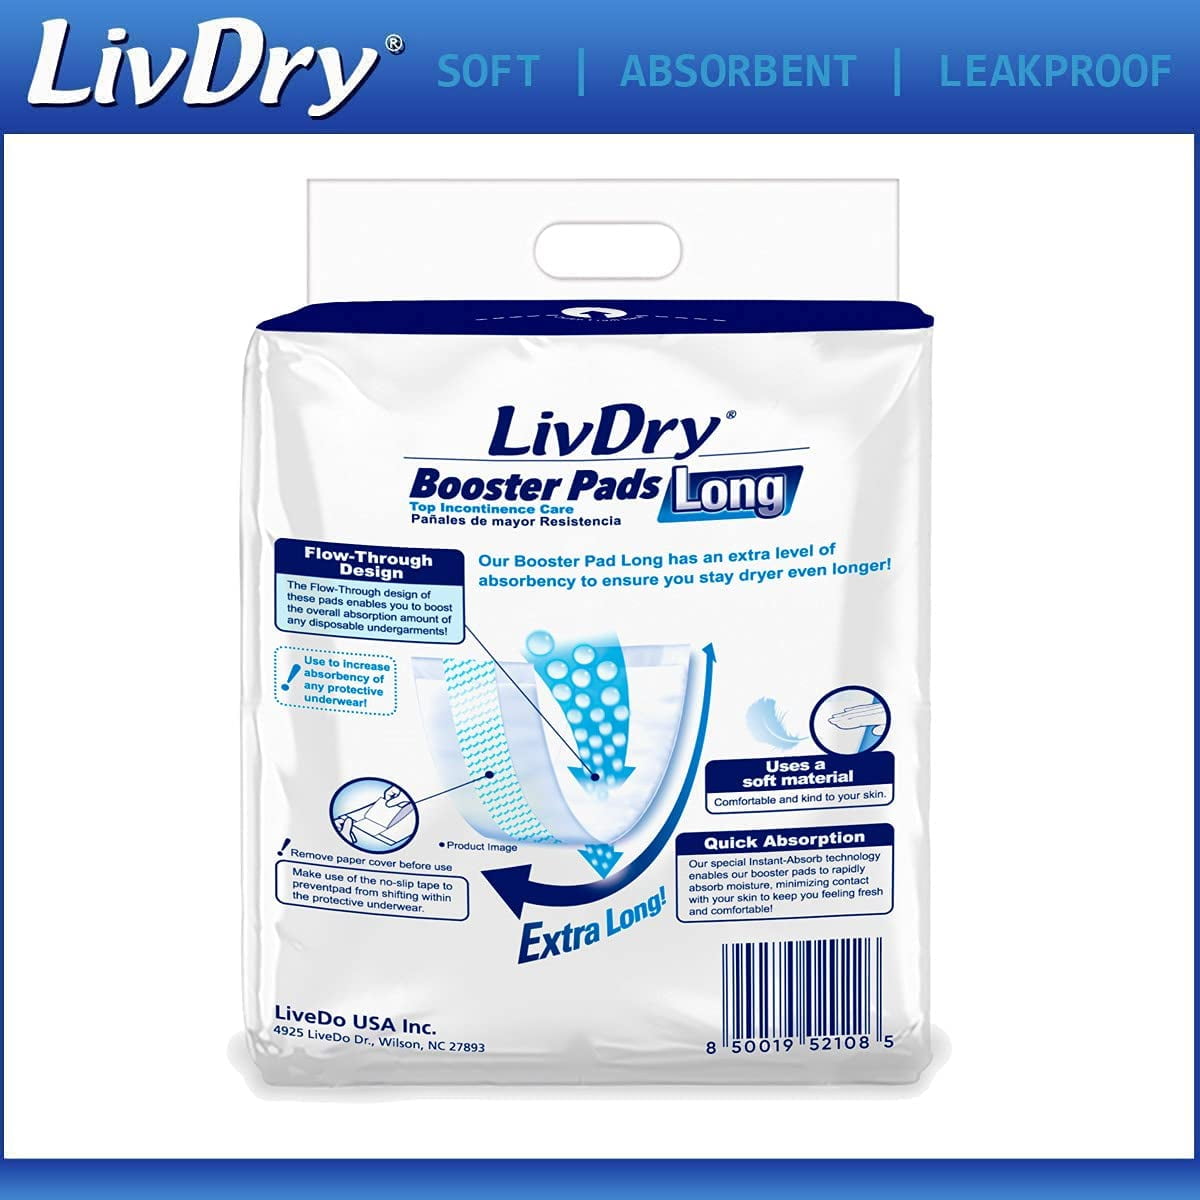 LivDry Unisex Incontinence Booster Pads